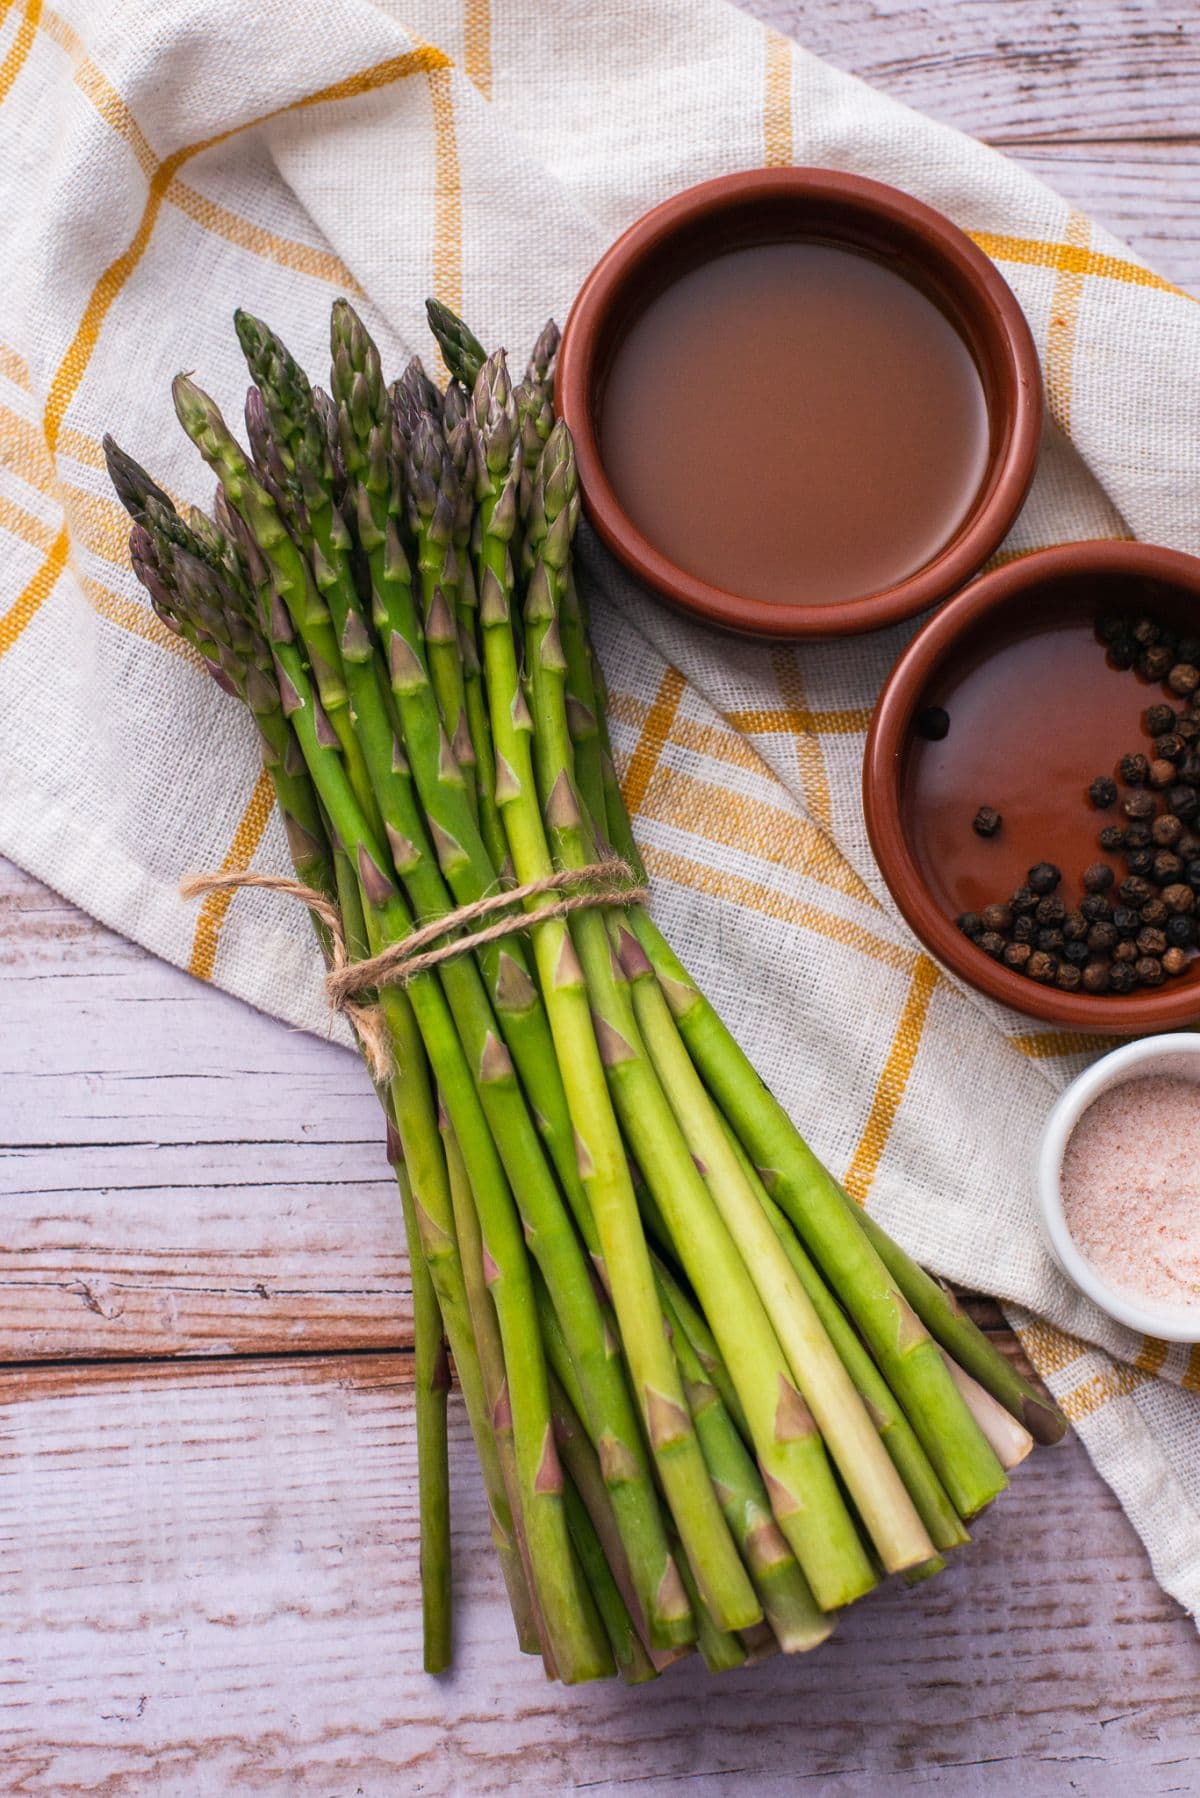 How to cook asparagus ingredients